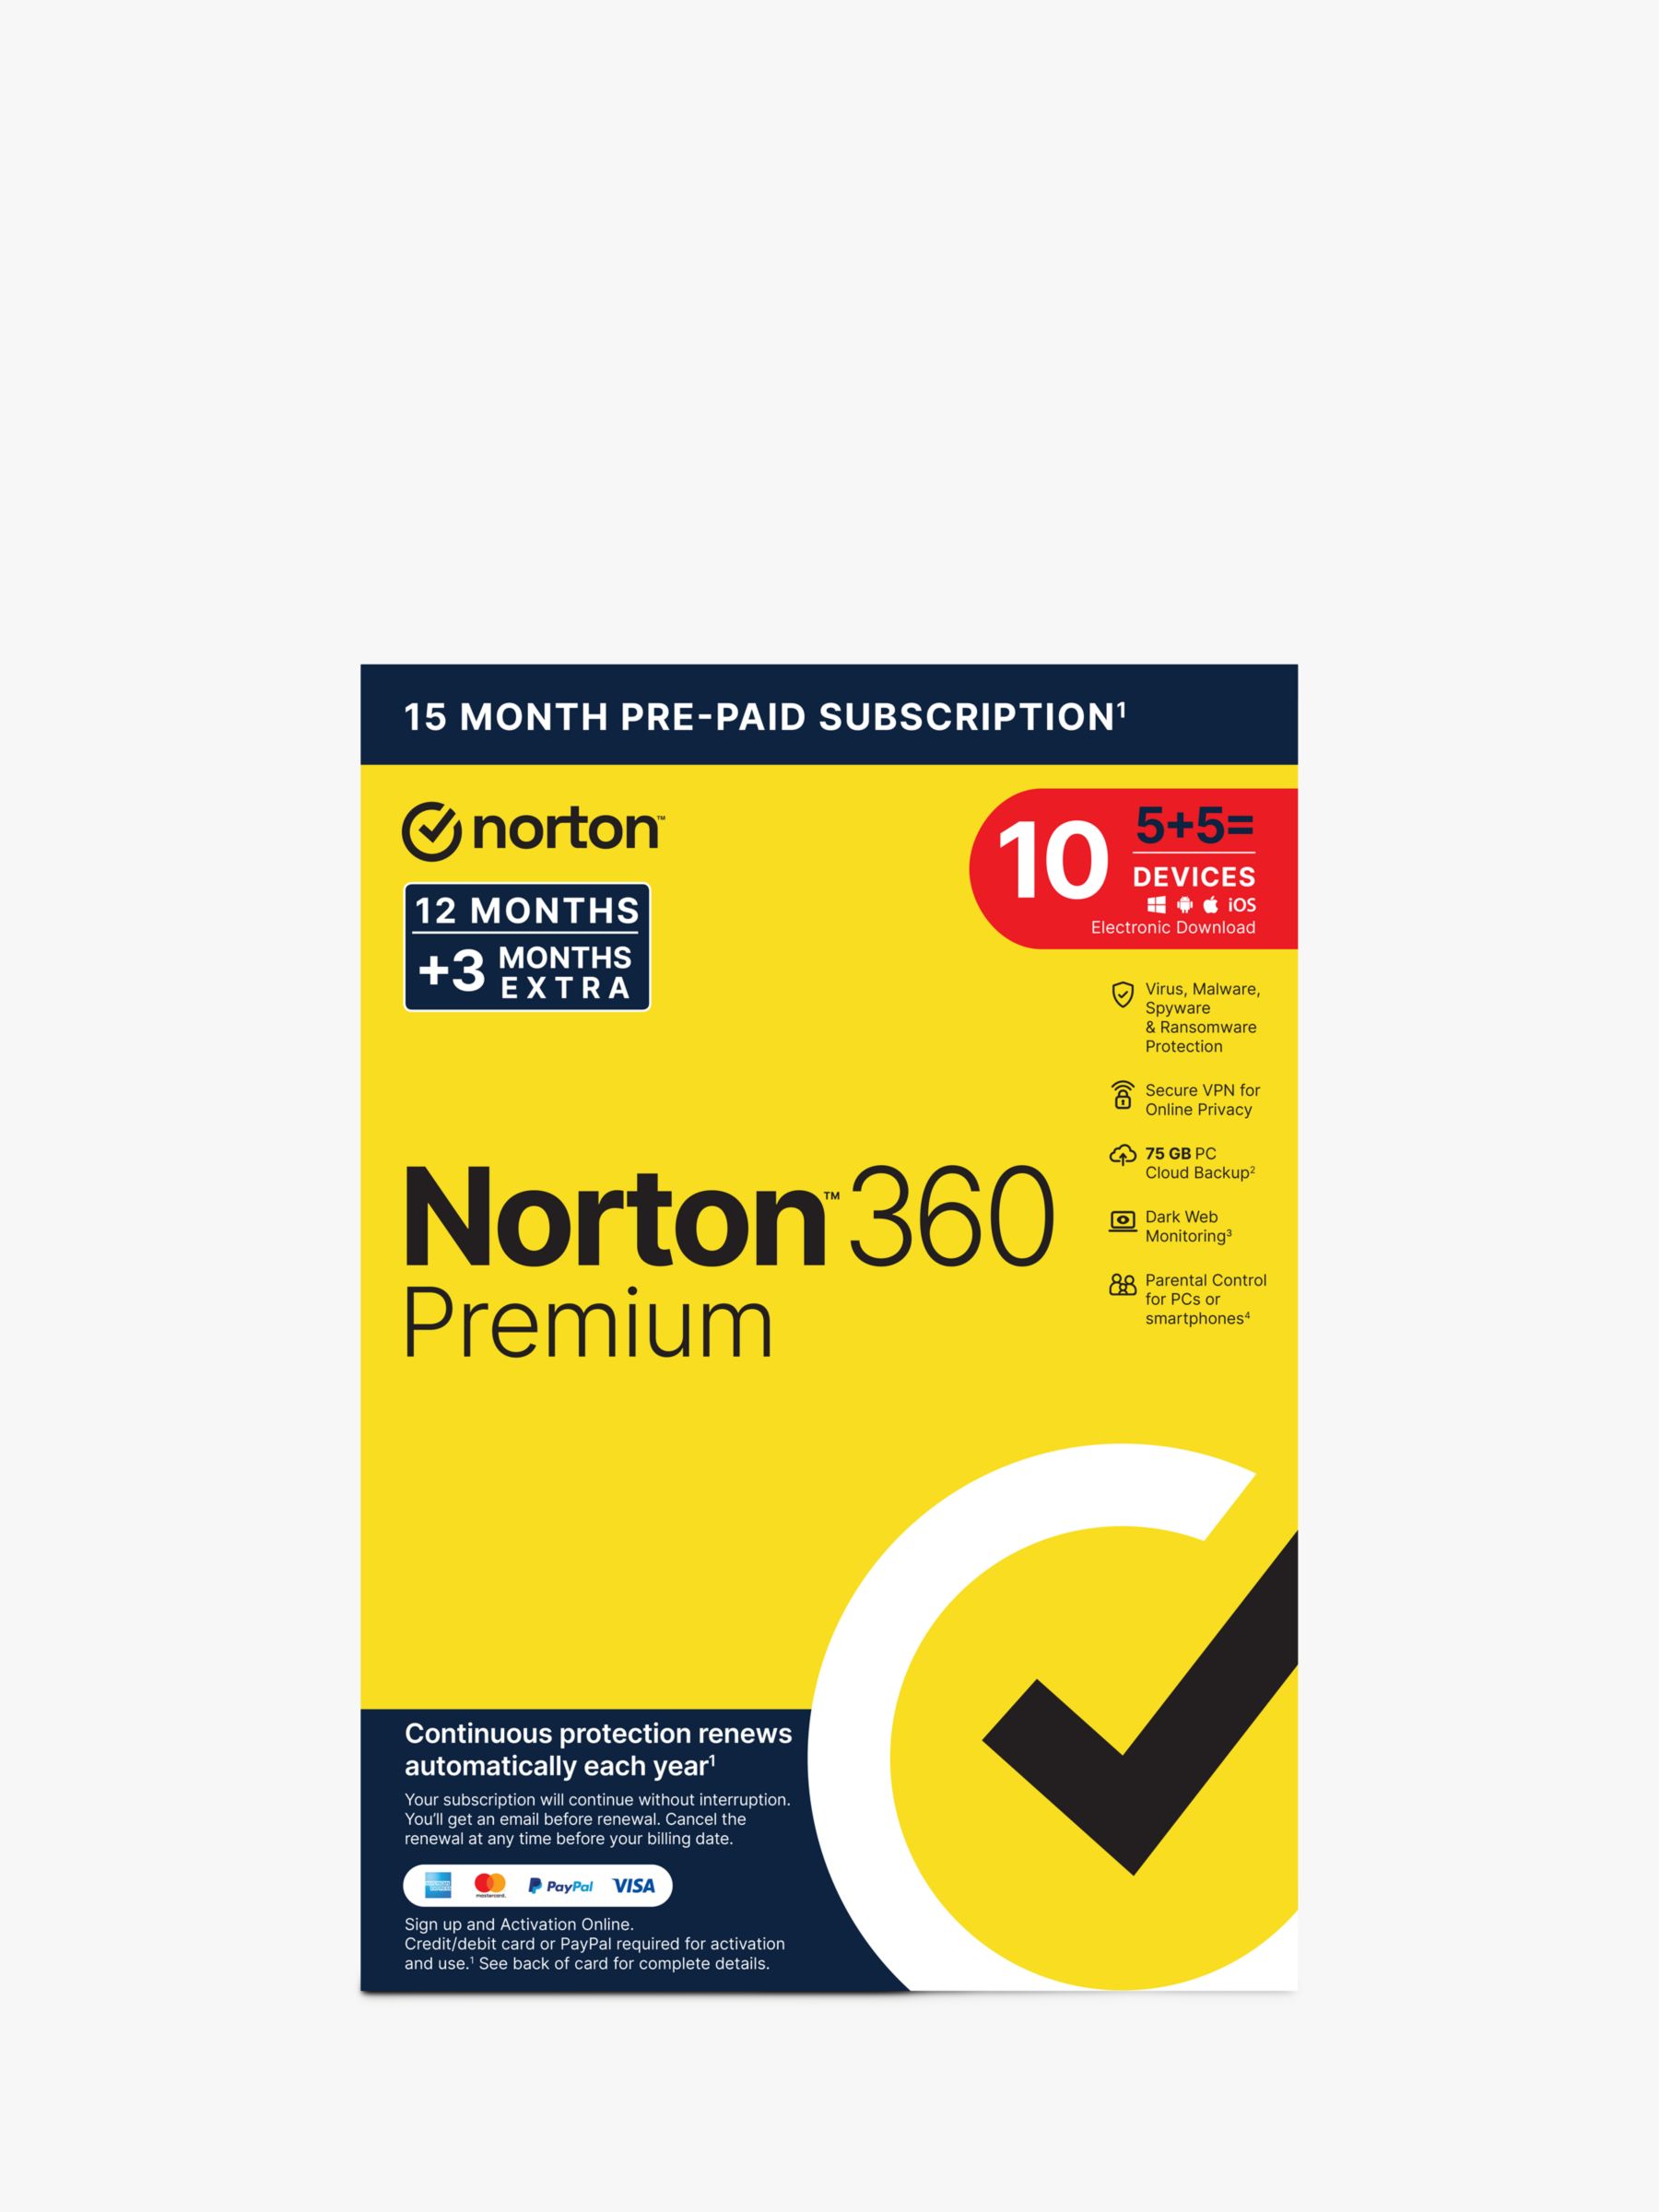 Norton 360 Premium, 15 Months Pre-Paid Subscription for 5 Devices and 5